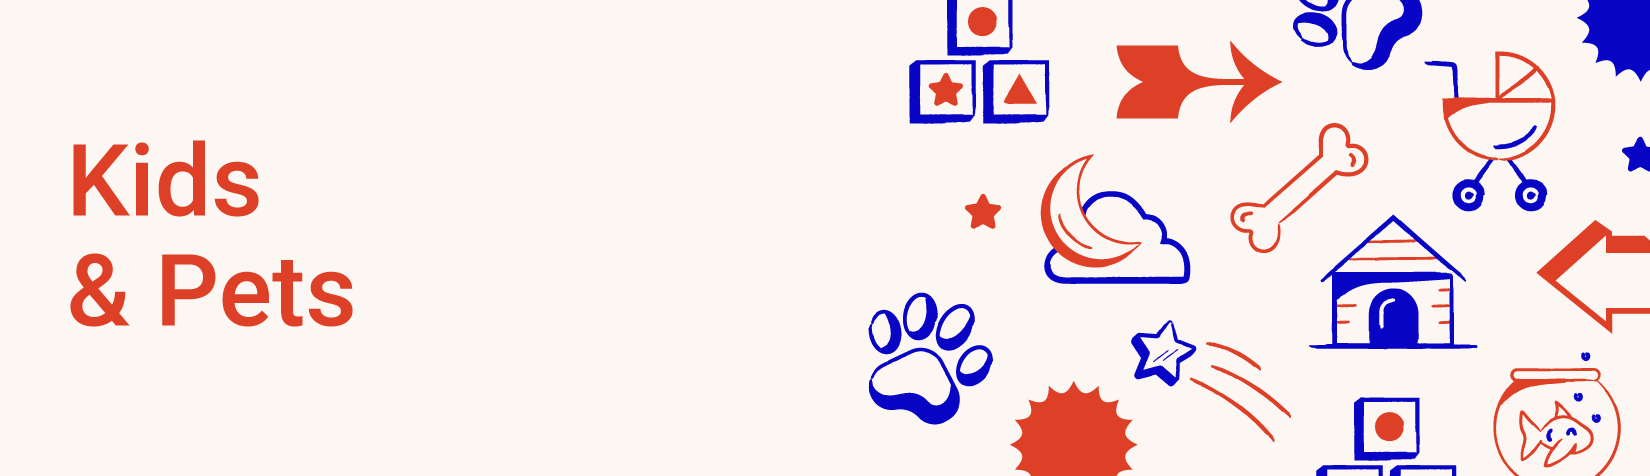 kids and pets header